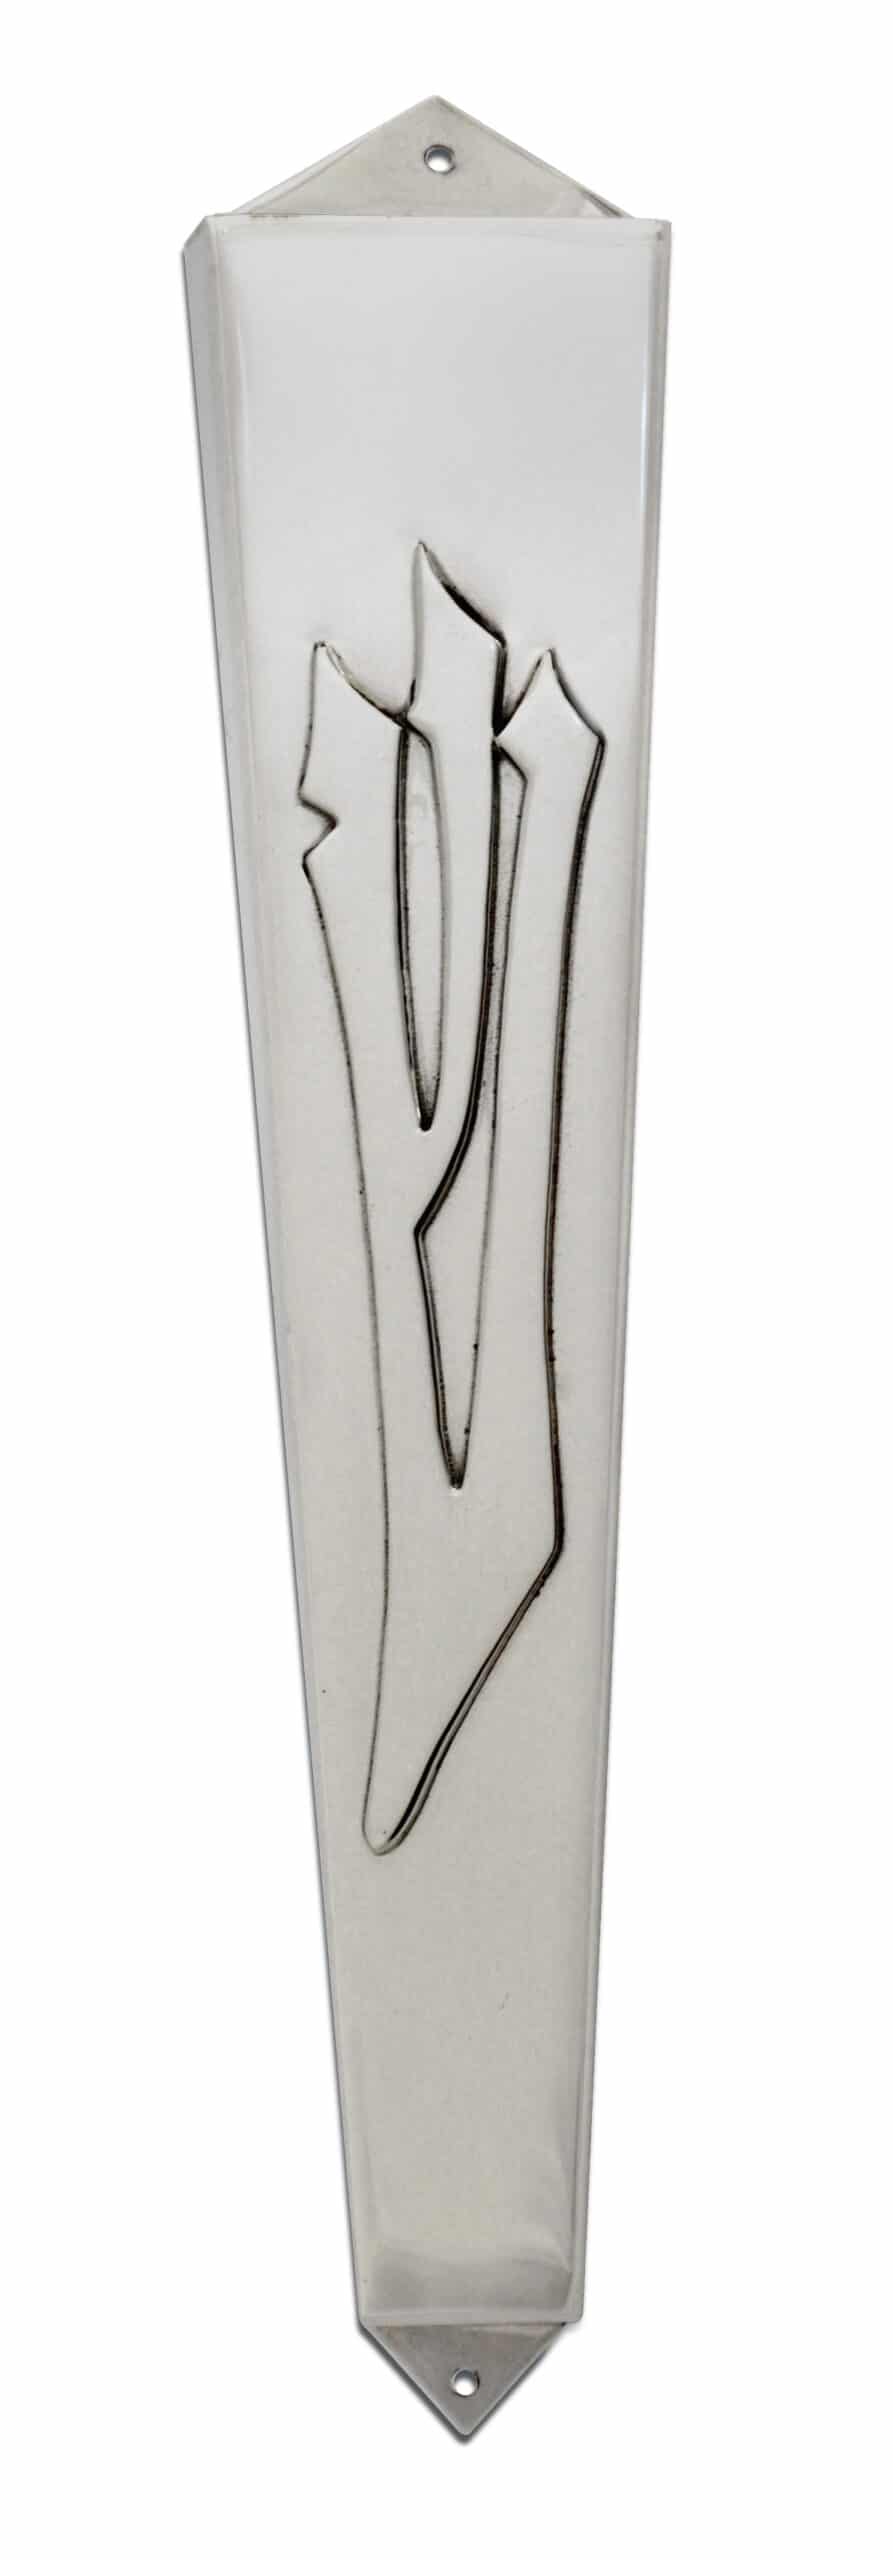 Vintage Inspired Silver Triangle Mezuzah Case